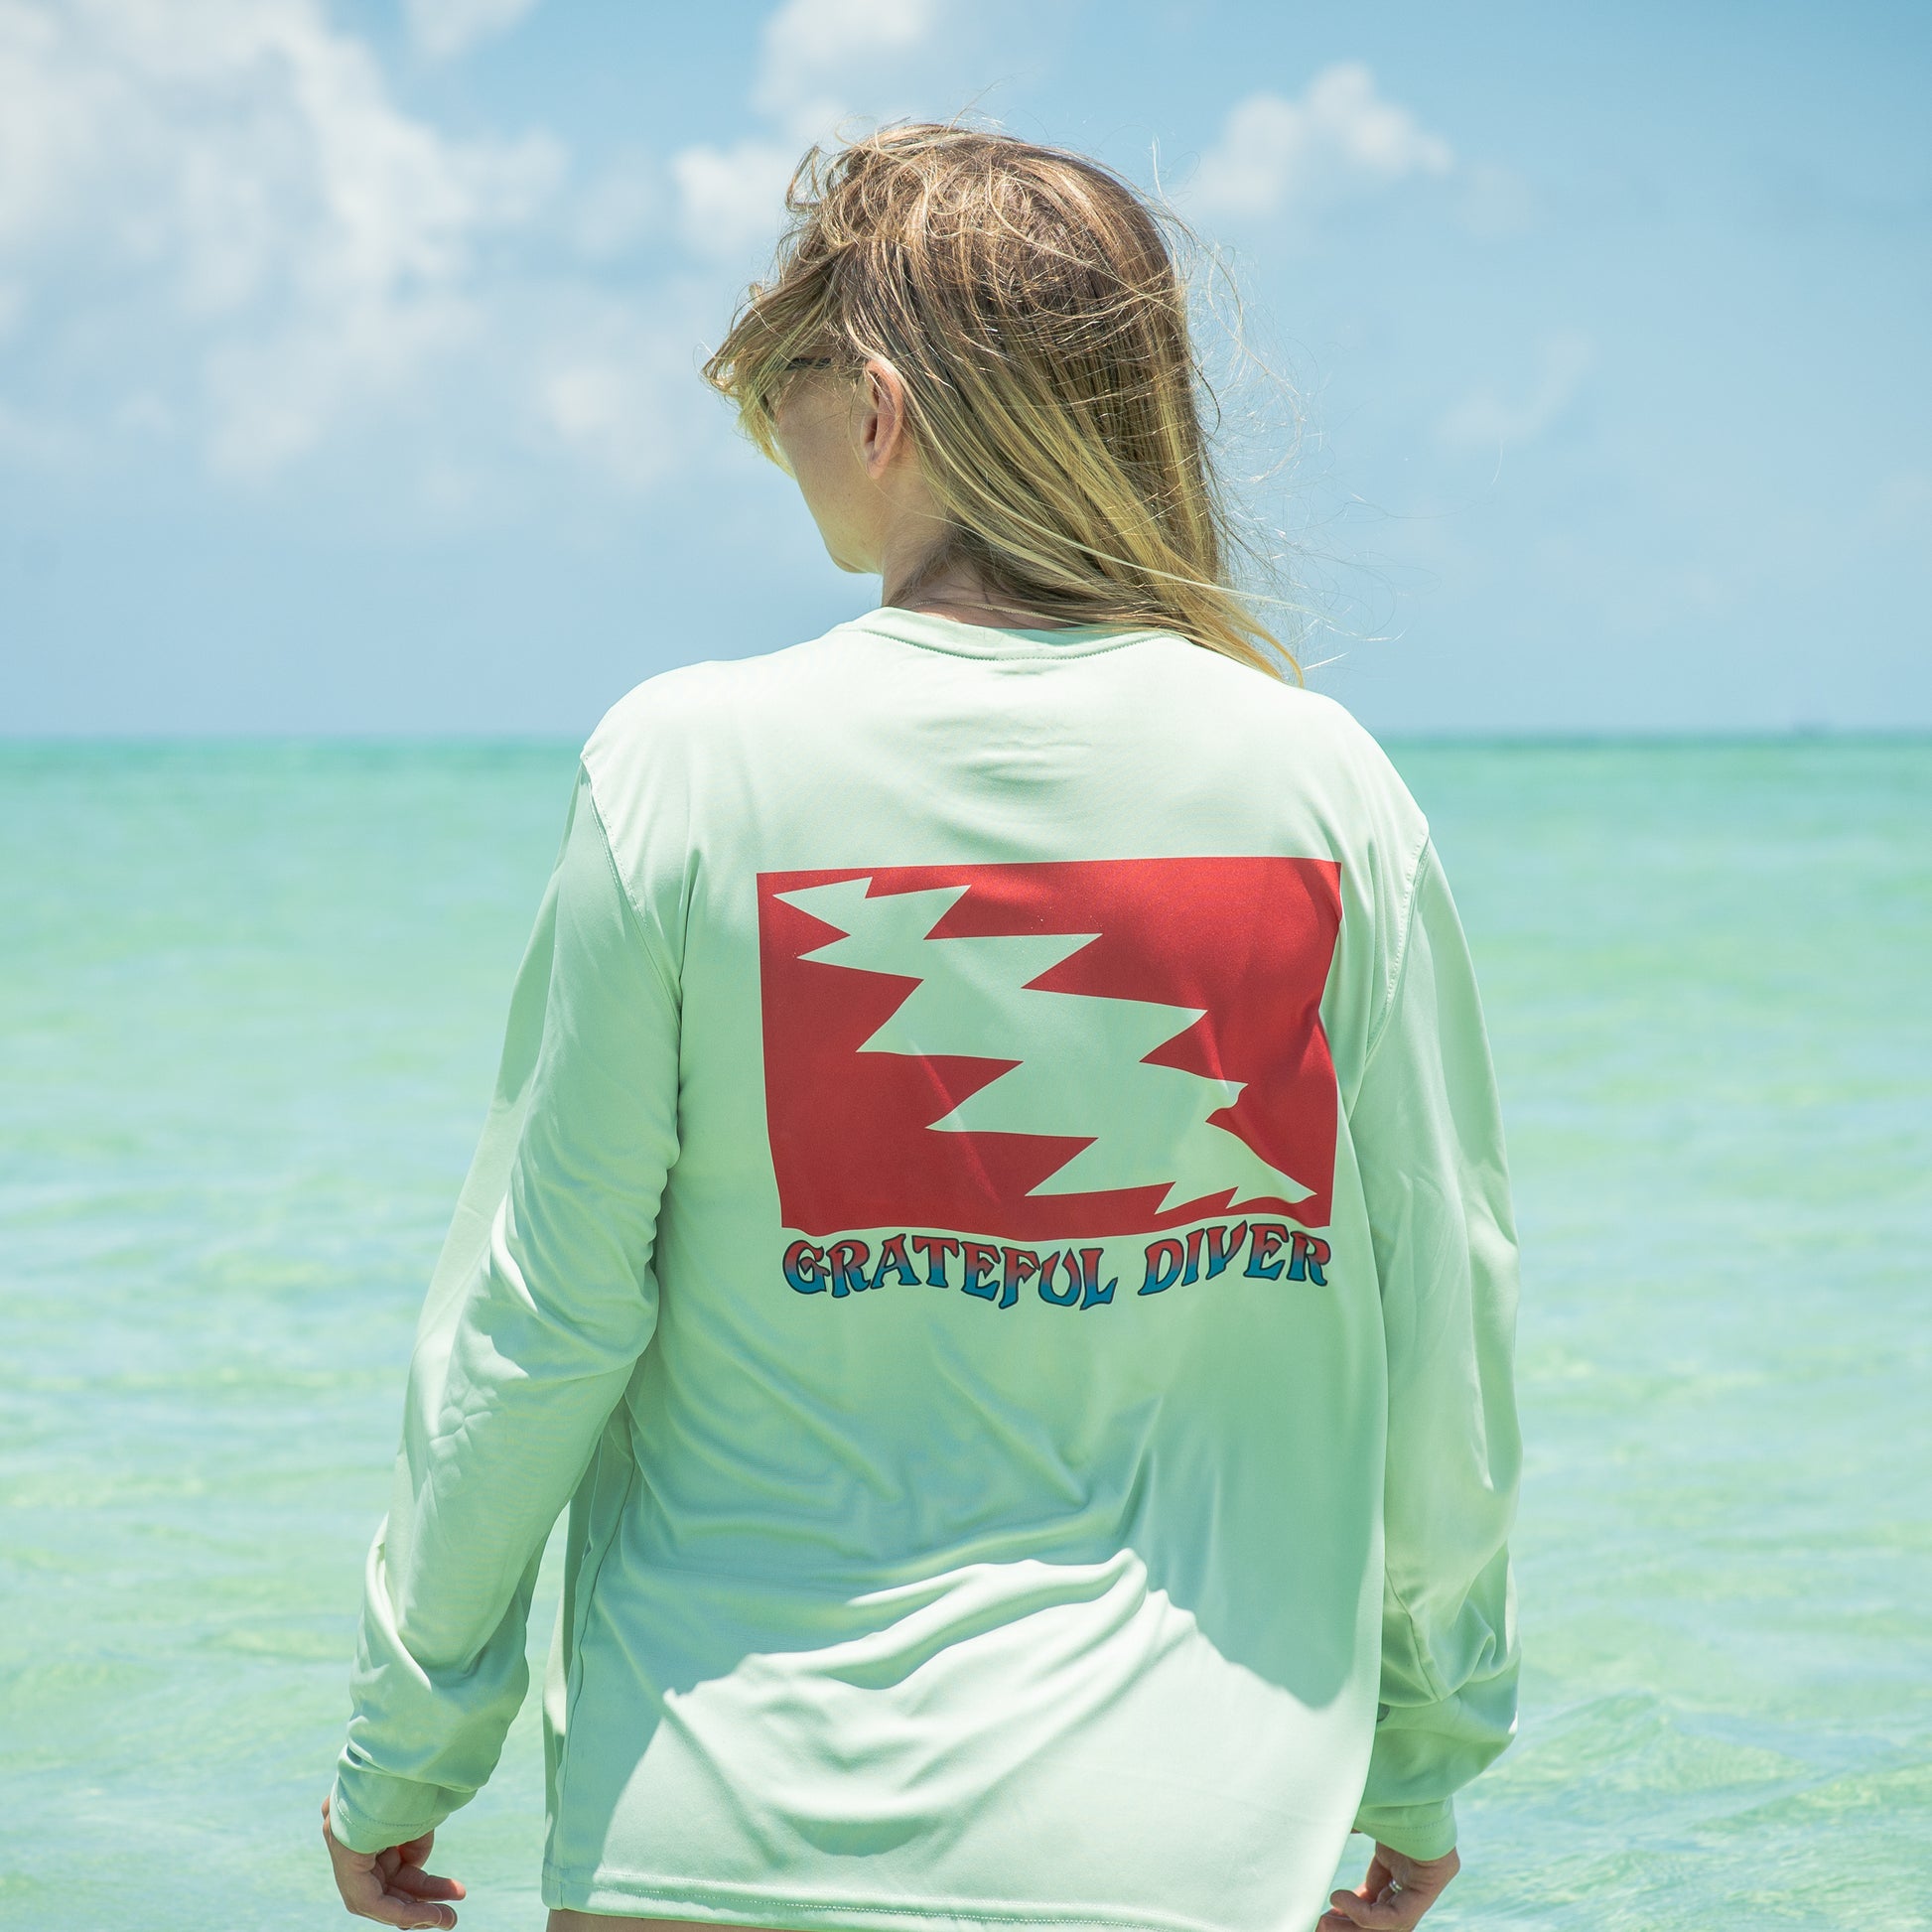 Grateful Diver Classic UV Shirt in sage back shot on woman in front of ocean